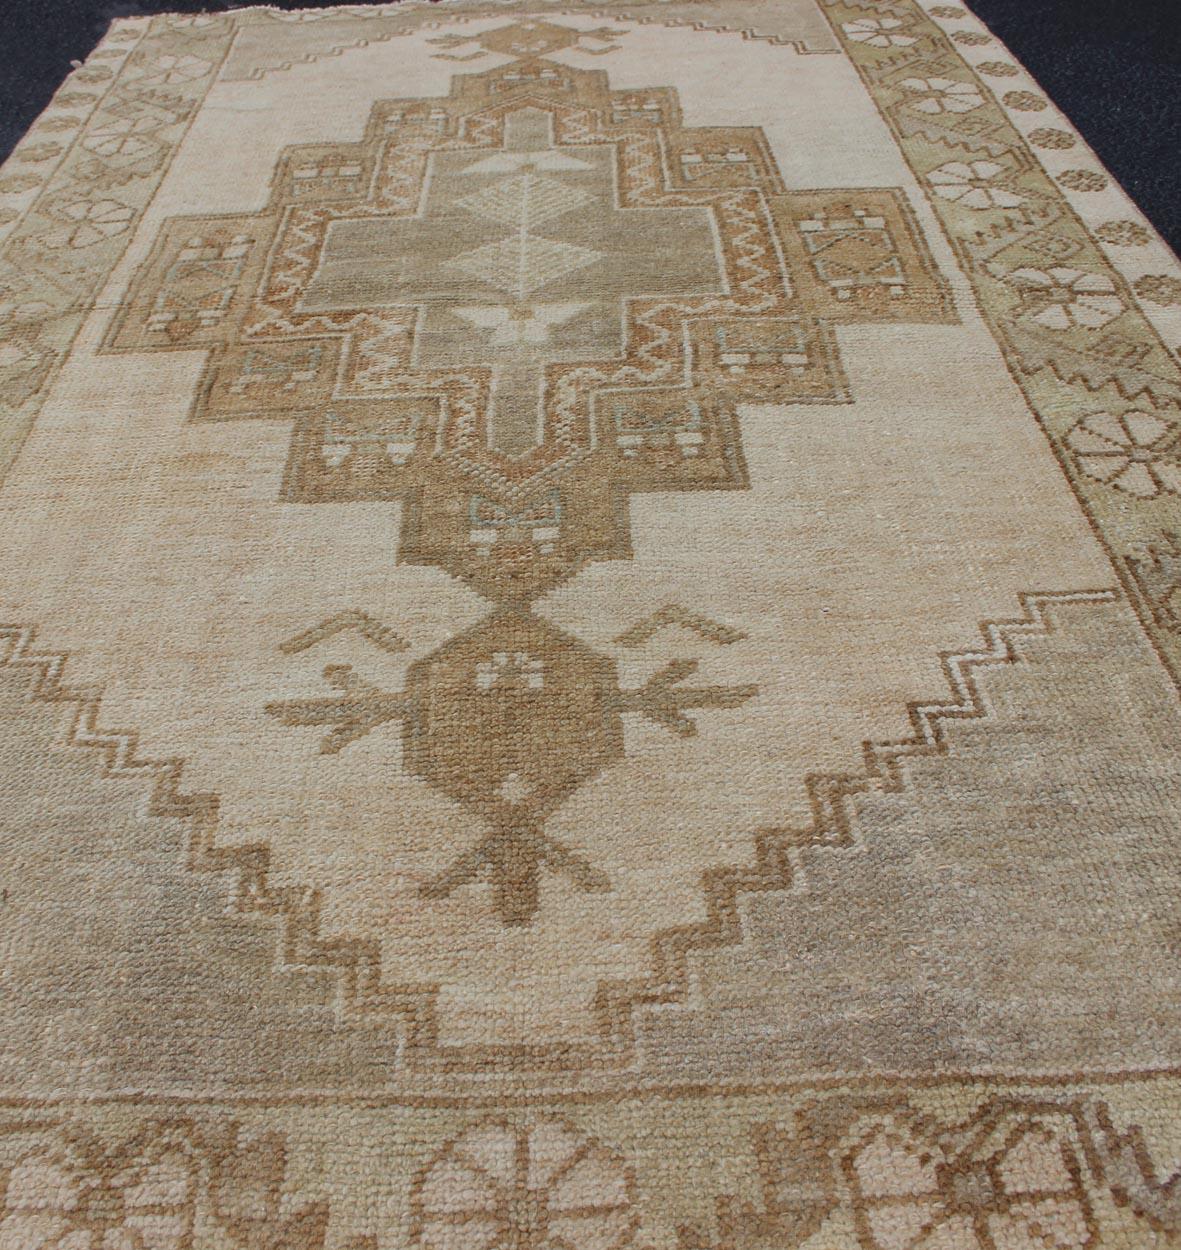 Vintage Turkish Oushak Rug in Sage Green, Taupe, Light Brown, and Light Green In Good Condition For Sale In Atlanta, GA